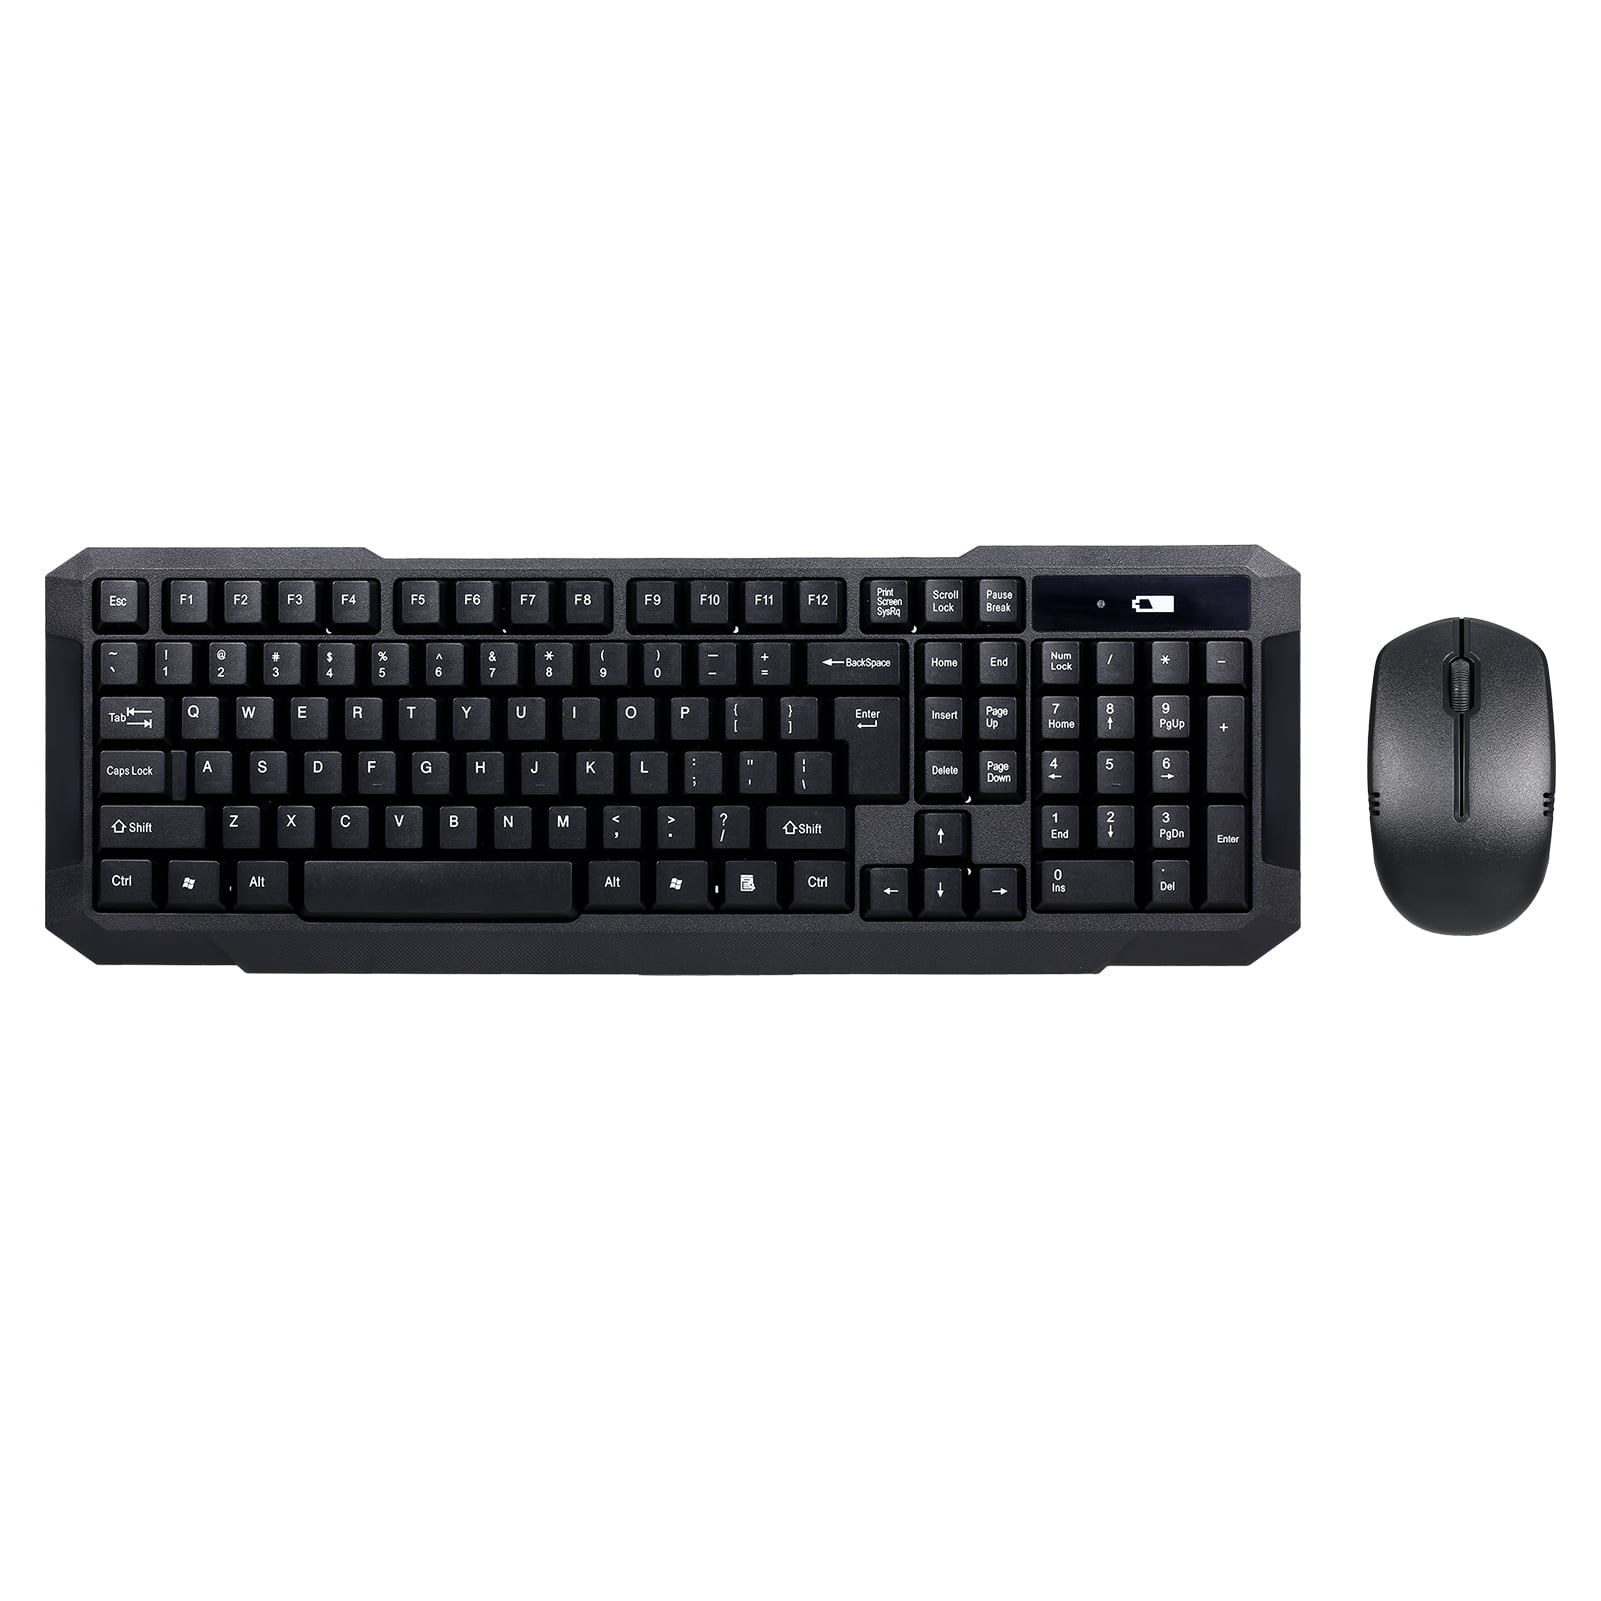 MeterMall New Wireless Keyboard Mouse Combo Portable Mobile Silent Optical Mouse for PC Desktop Black